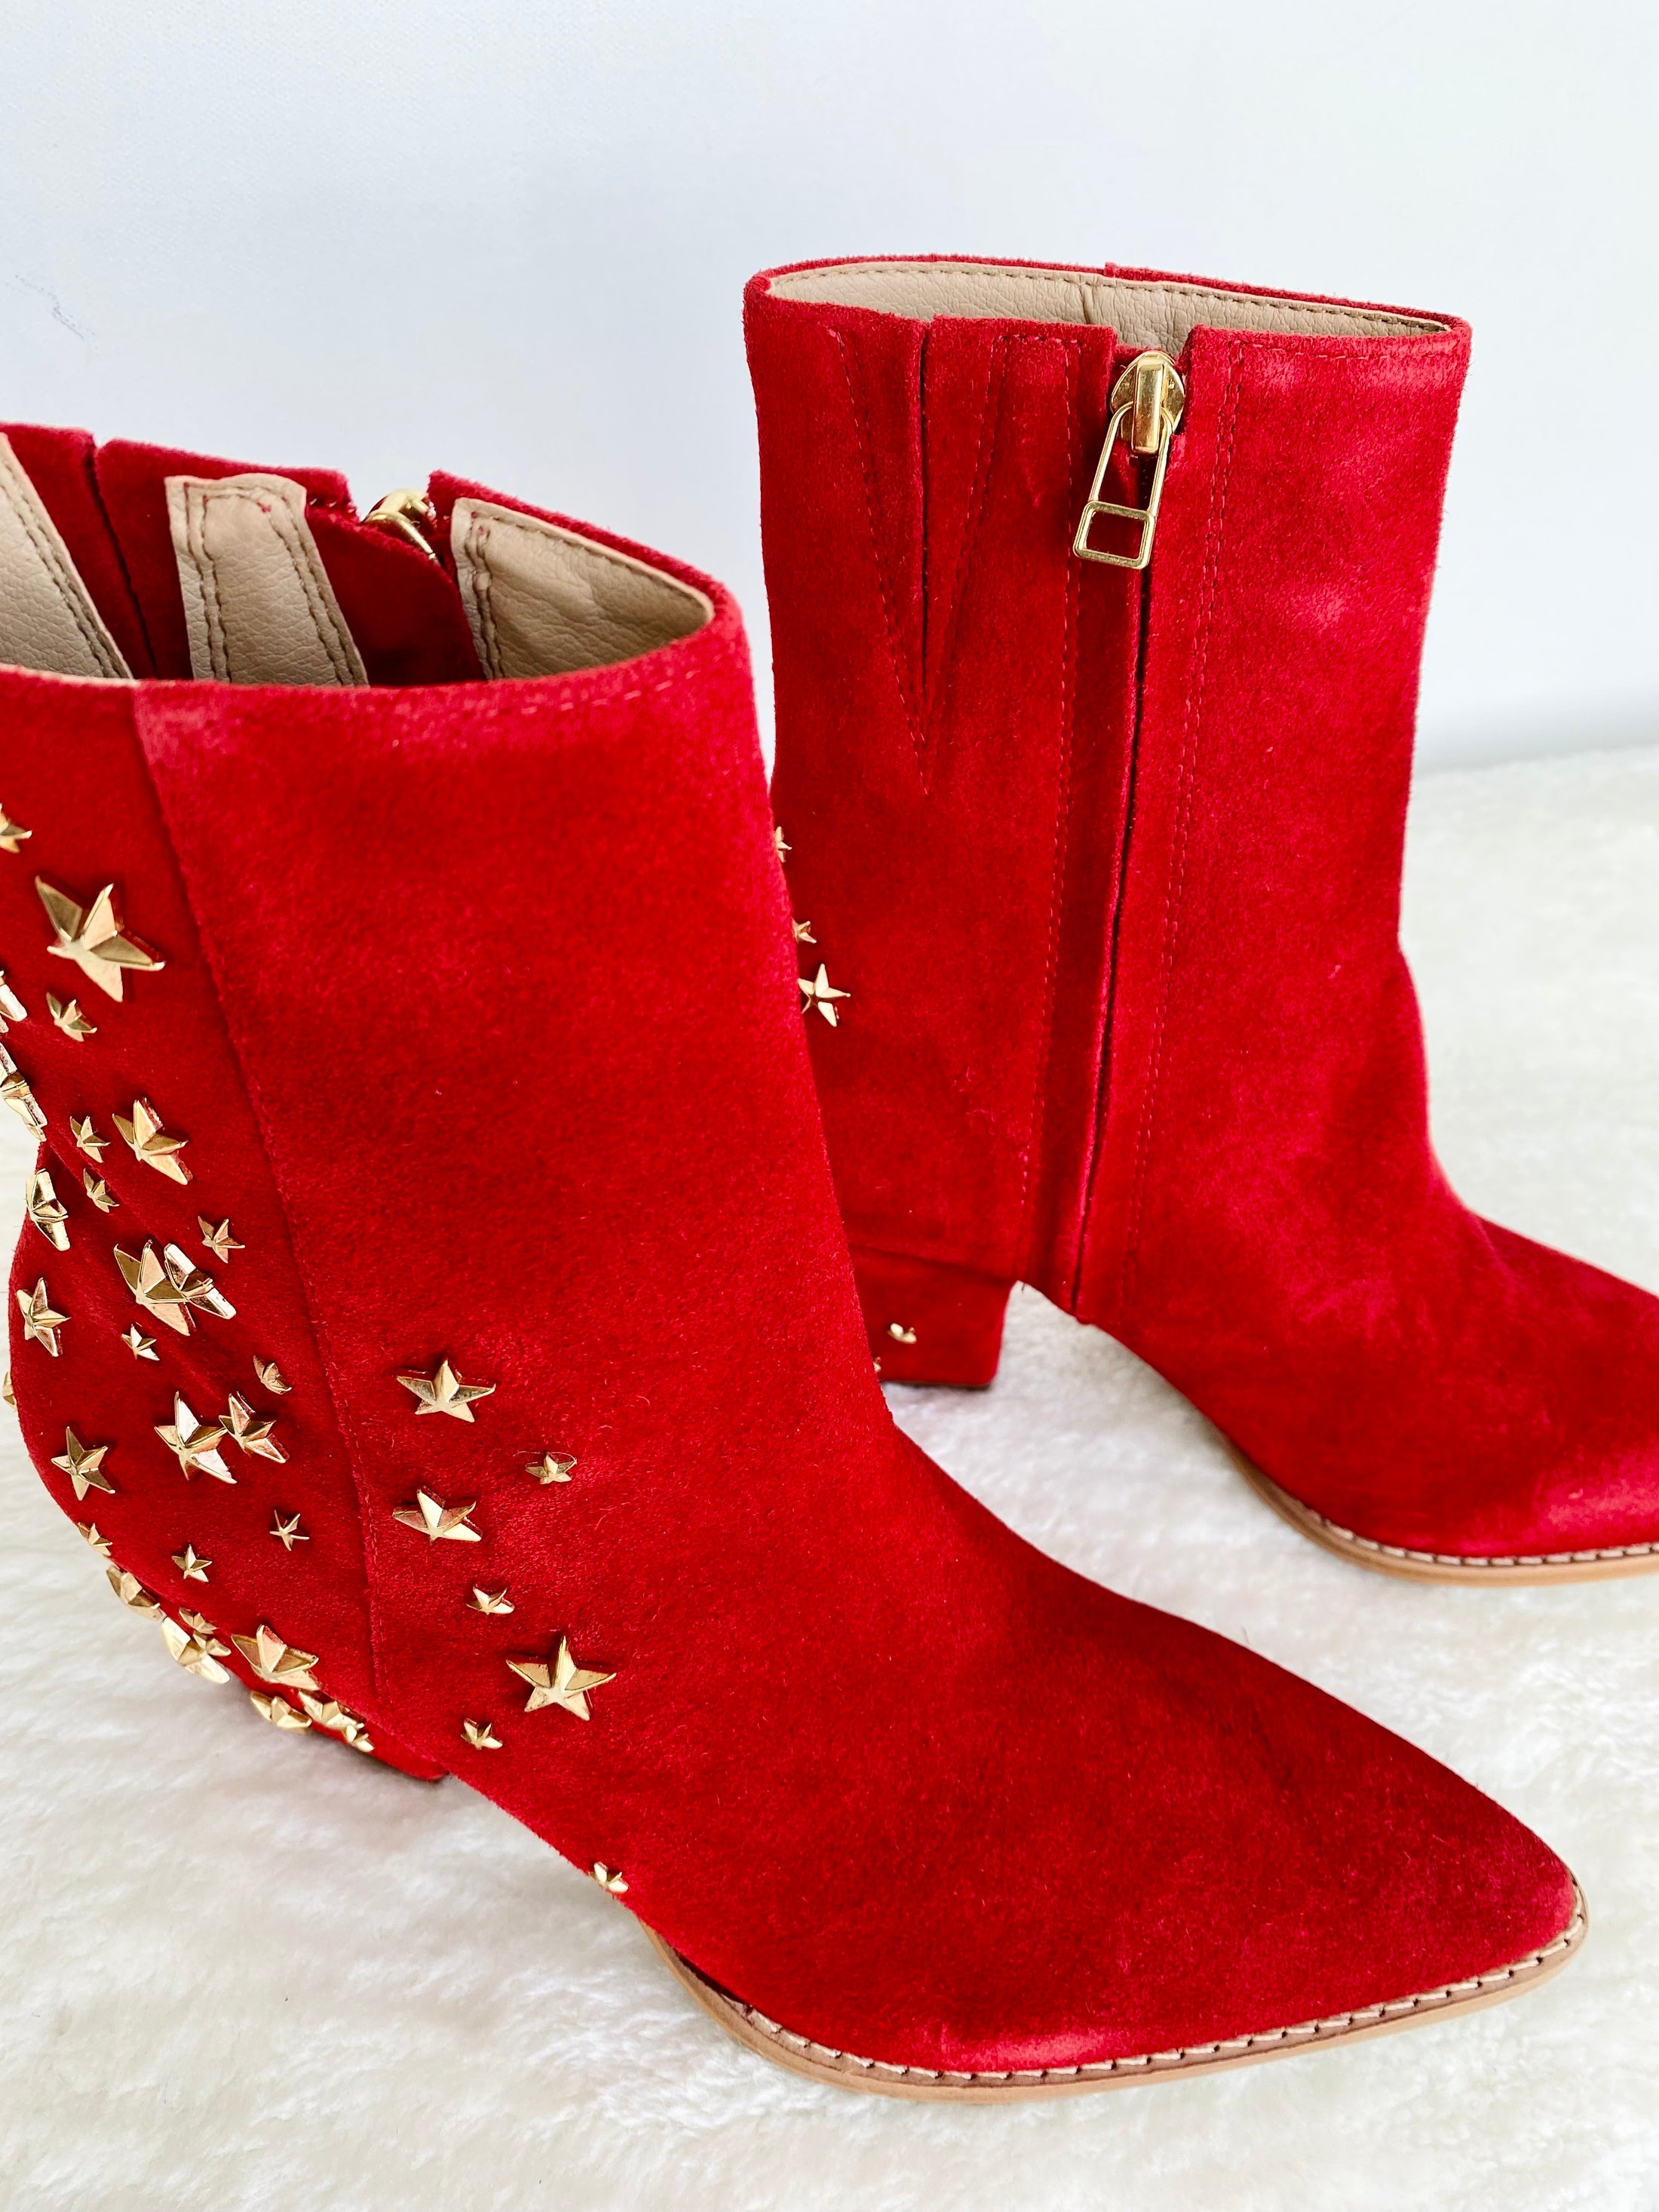 beautiful matisse red boots with gold star and gold zipper